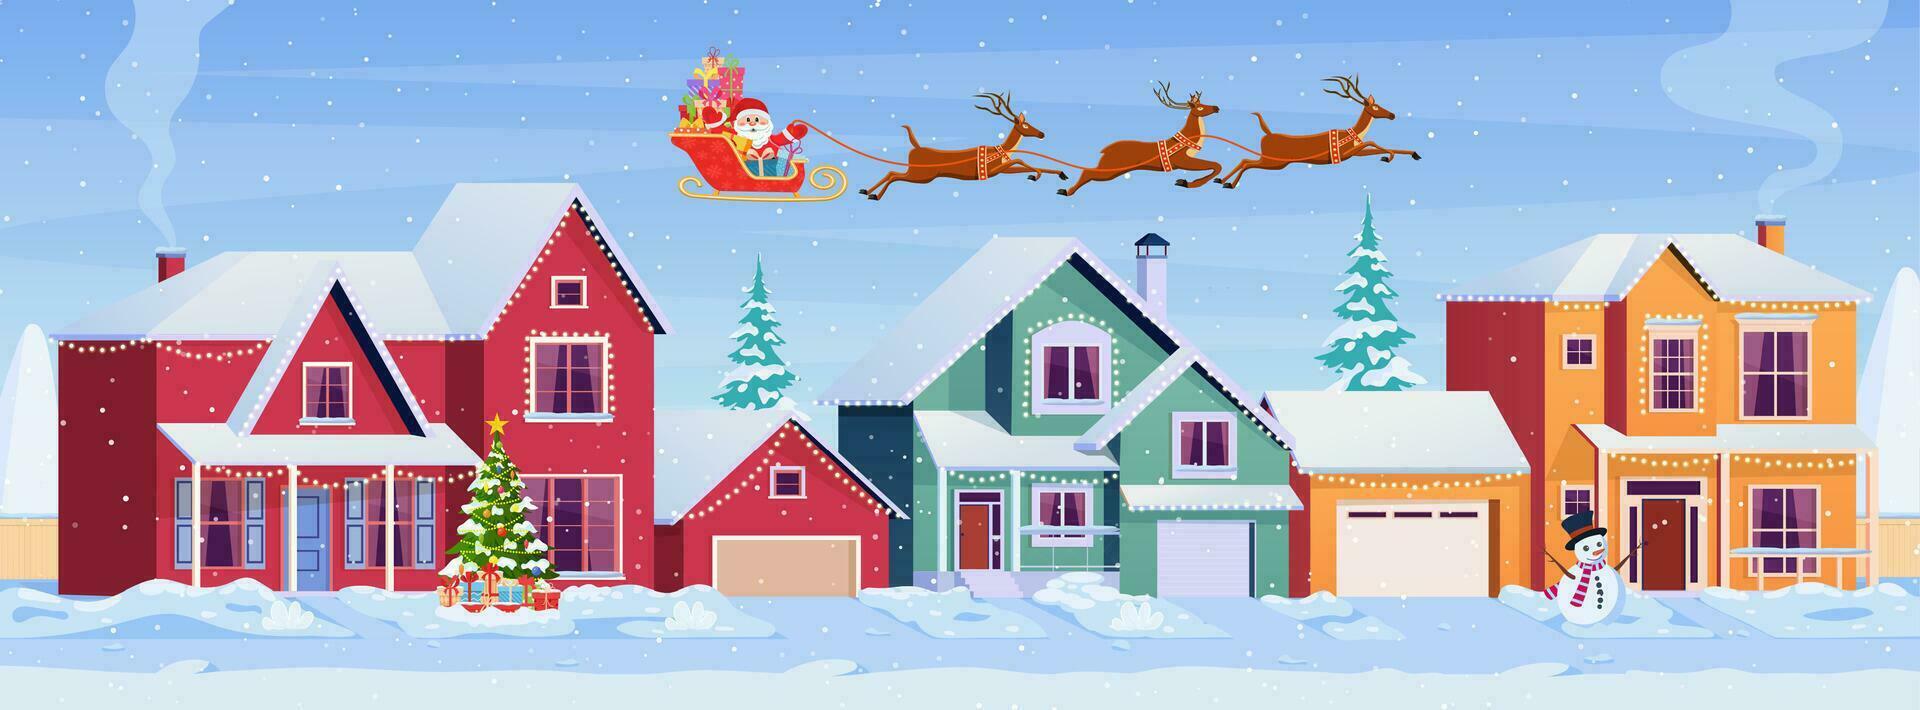 Residential houses with christmas decoration at day. cartoon winter landscape street with snow on roofs and holiday garlands, christmas tree, snowman. Santa Claus with deers in sky Vector illustration